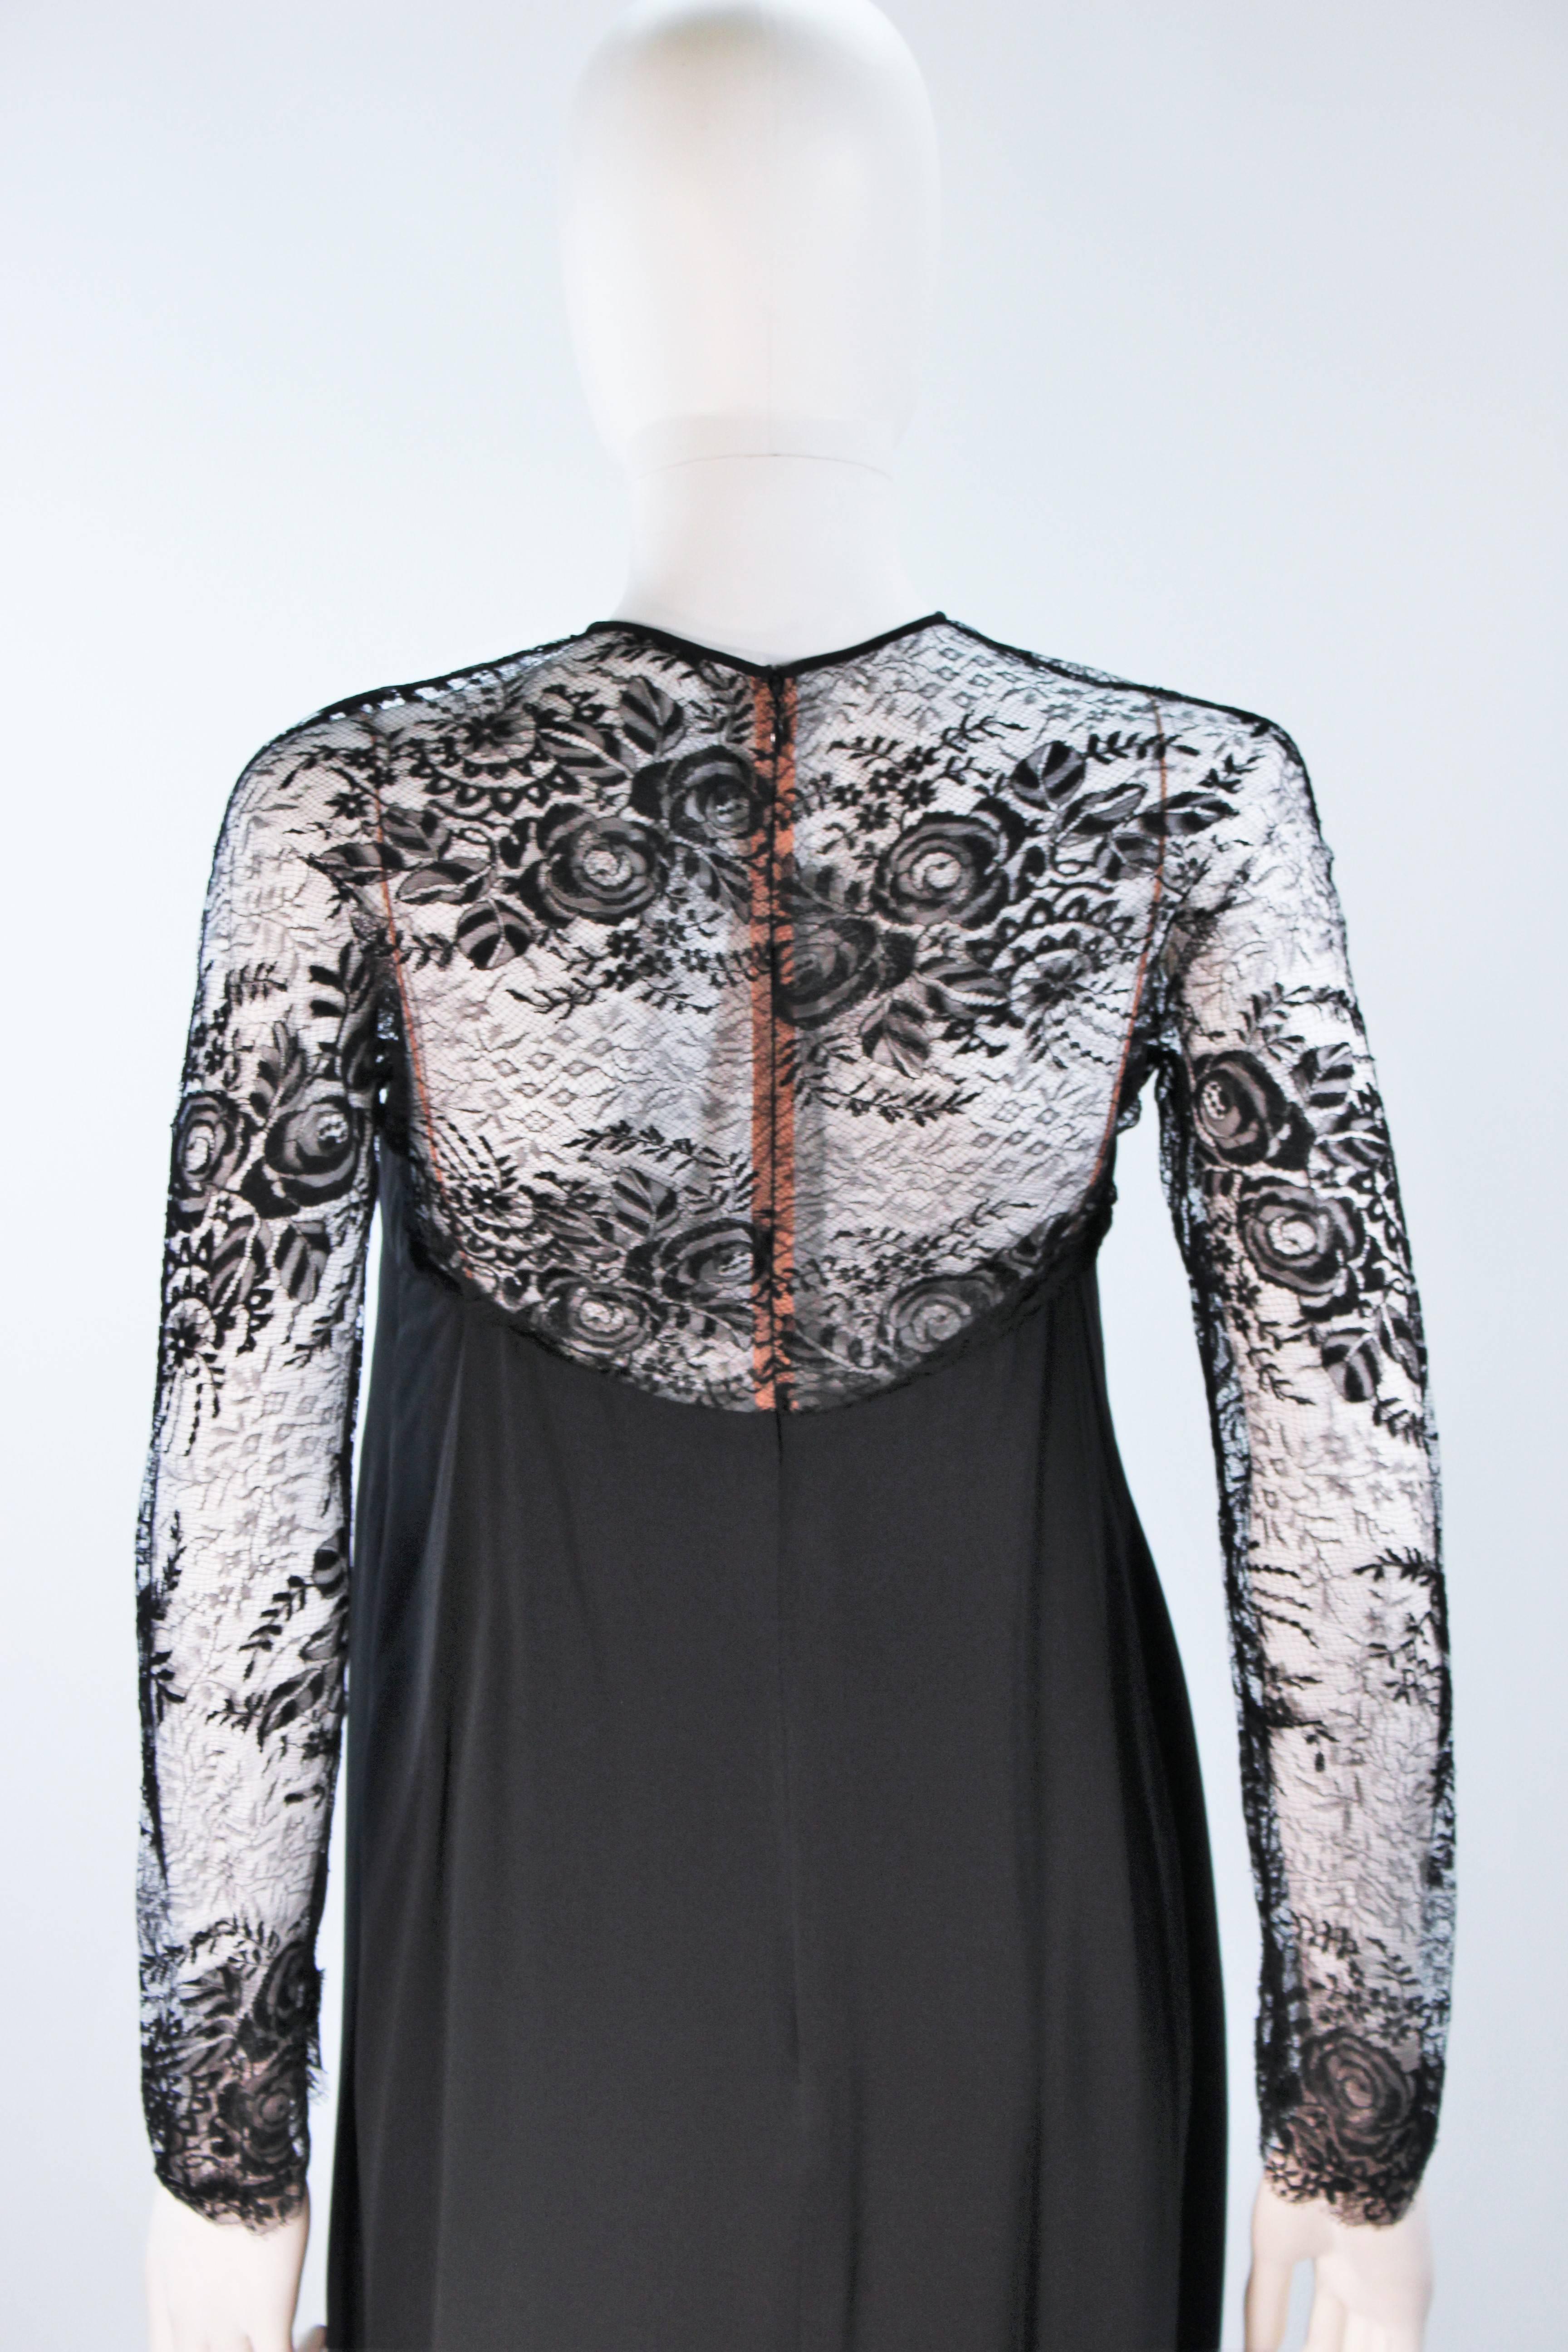 GALANOS Black Lace Cocktail Dress with Metallic Accents Size 8-10 5